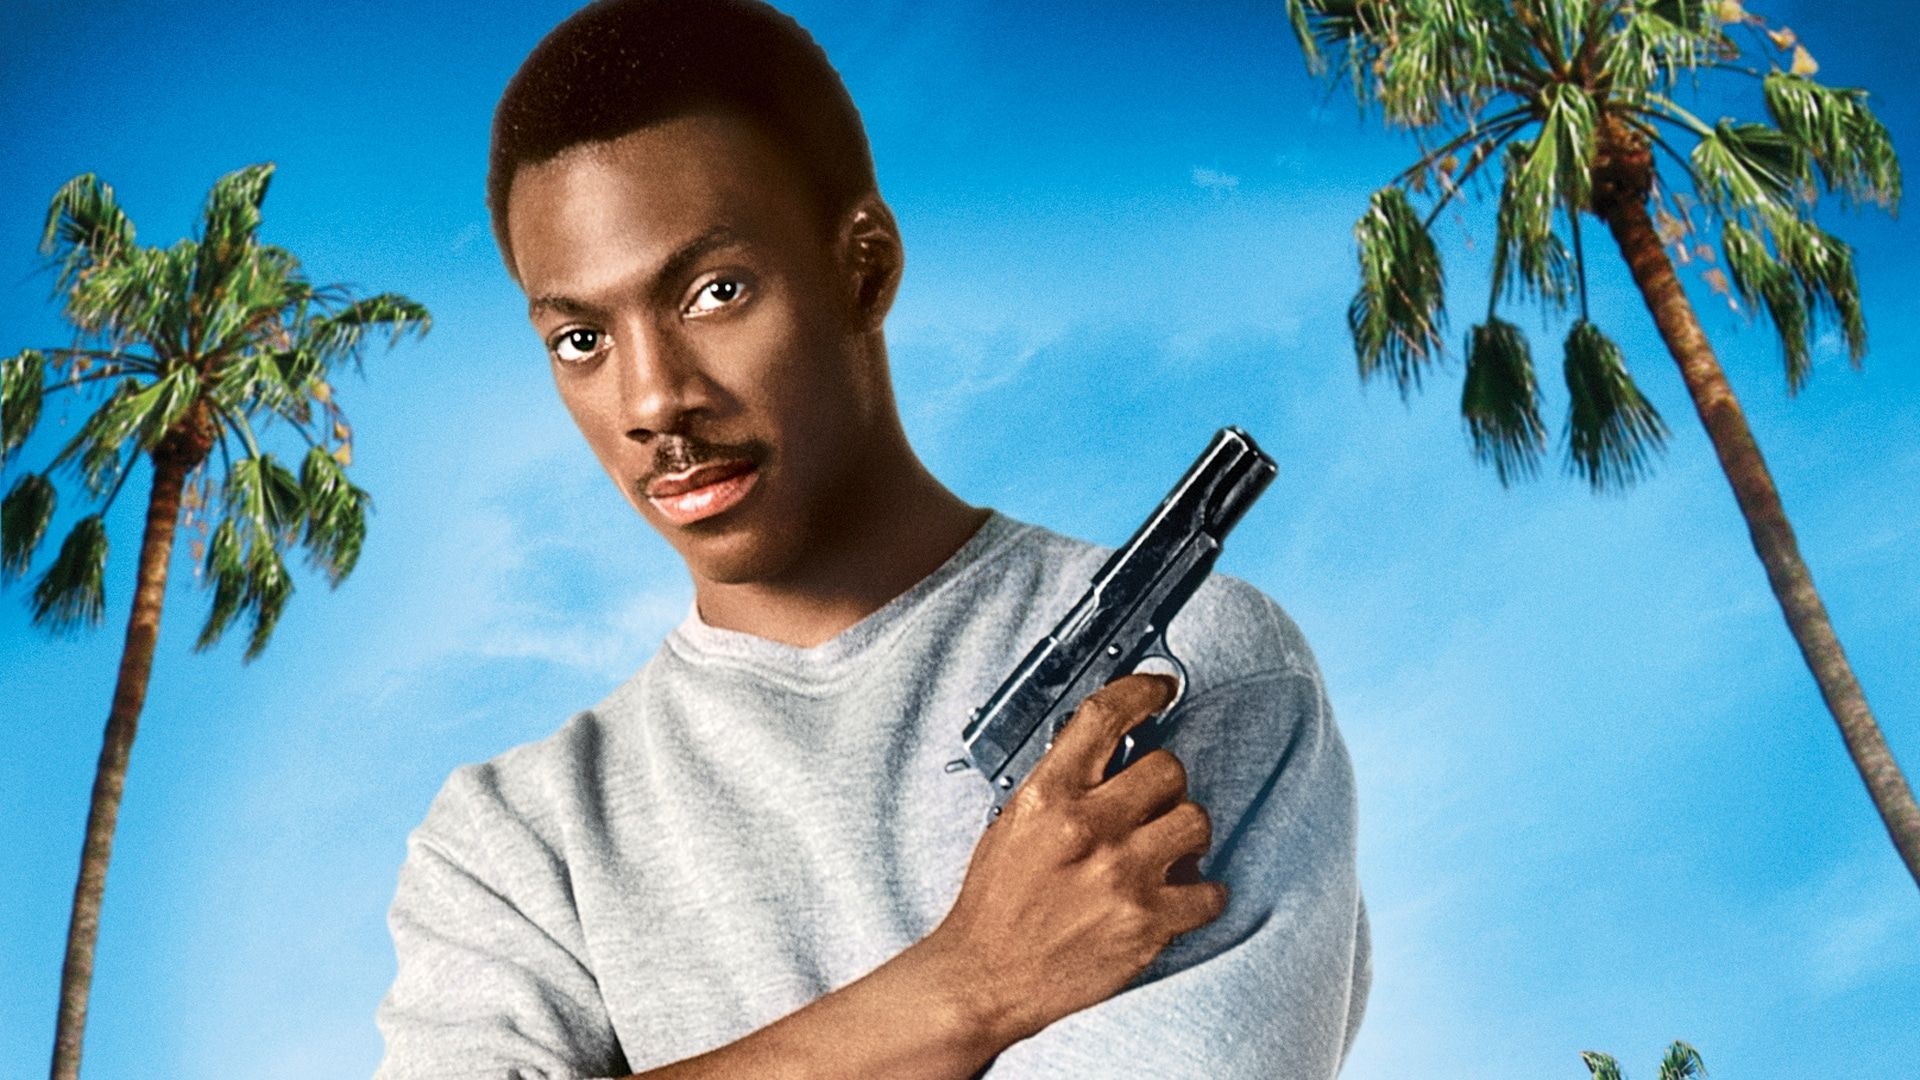 Beverly Hills Cop, Stunning wallpapers, Iconic backgrounds, Vibrant visuals, 1920x1080 Full HD Desktop